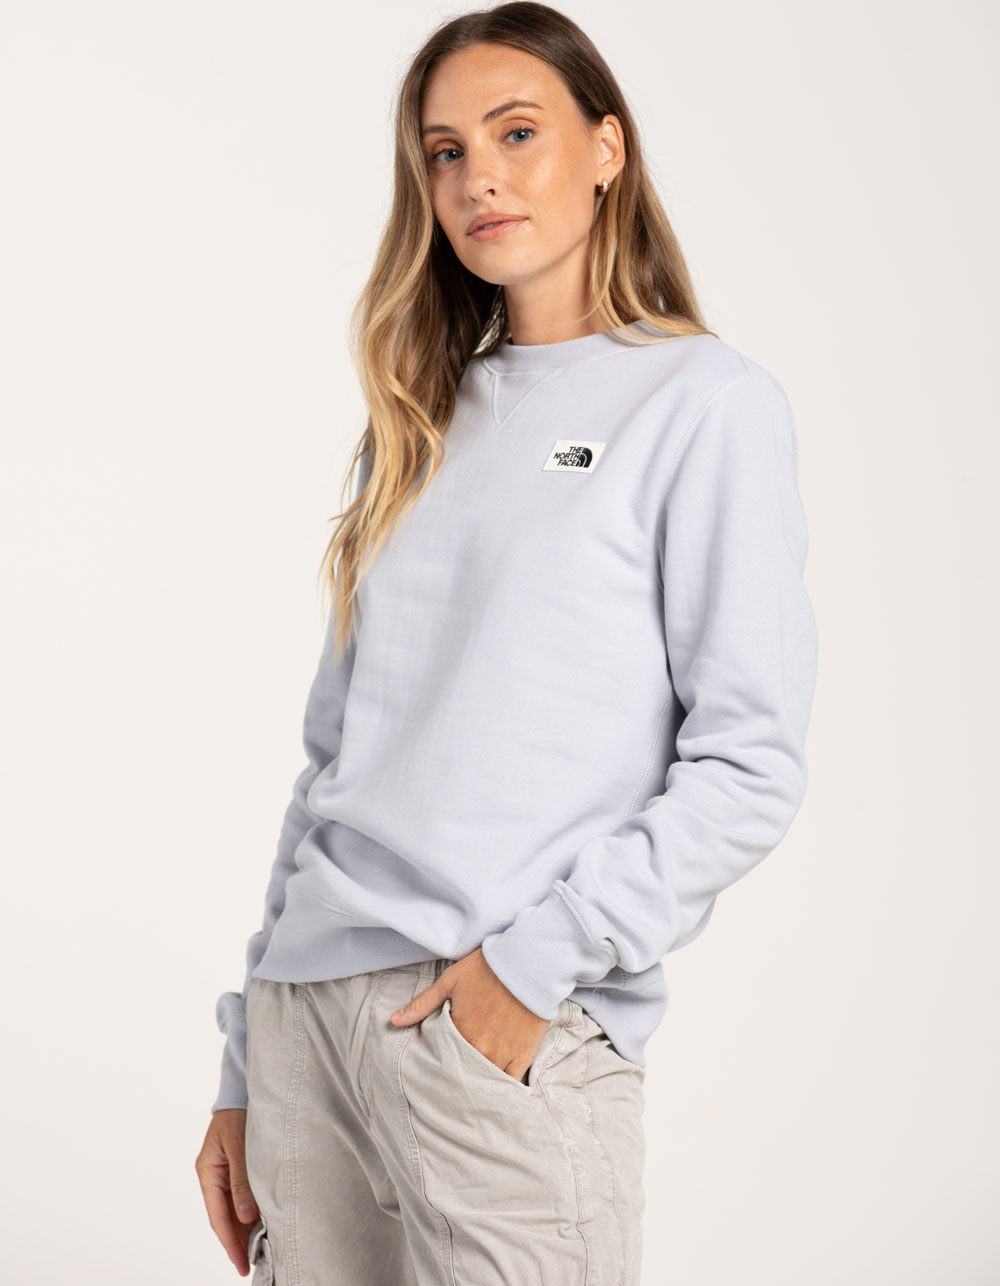 PERIWINKLE Patch Tillys NORTH Heritage Crewneck FACE Womens | Sweatshirt THE -